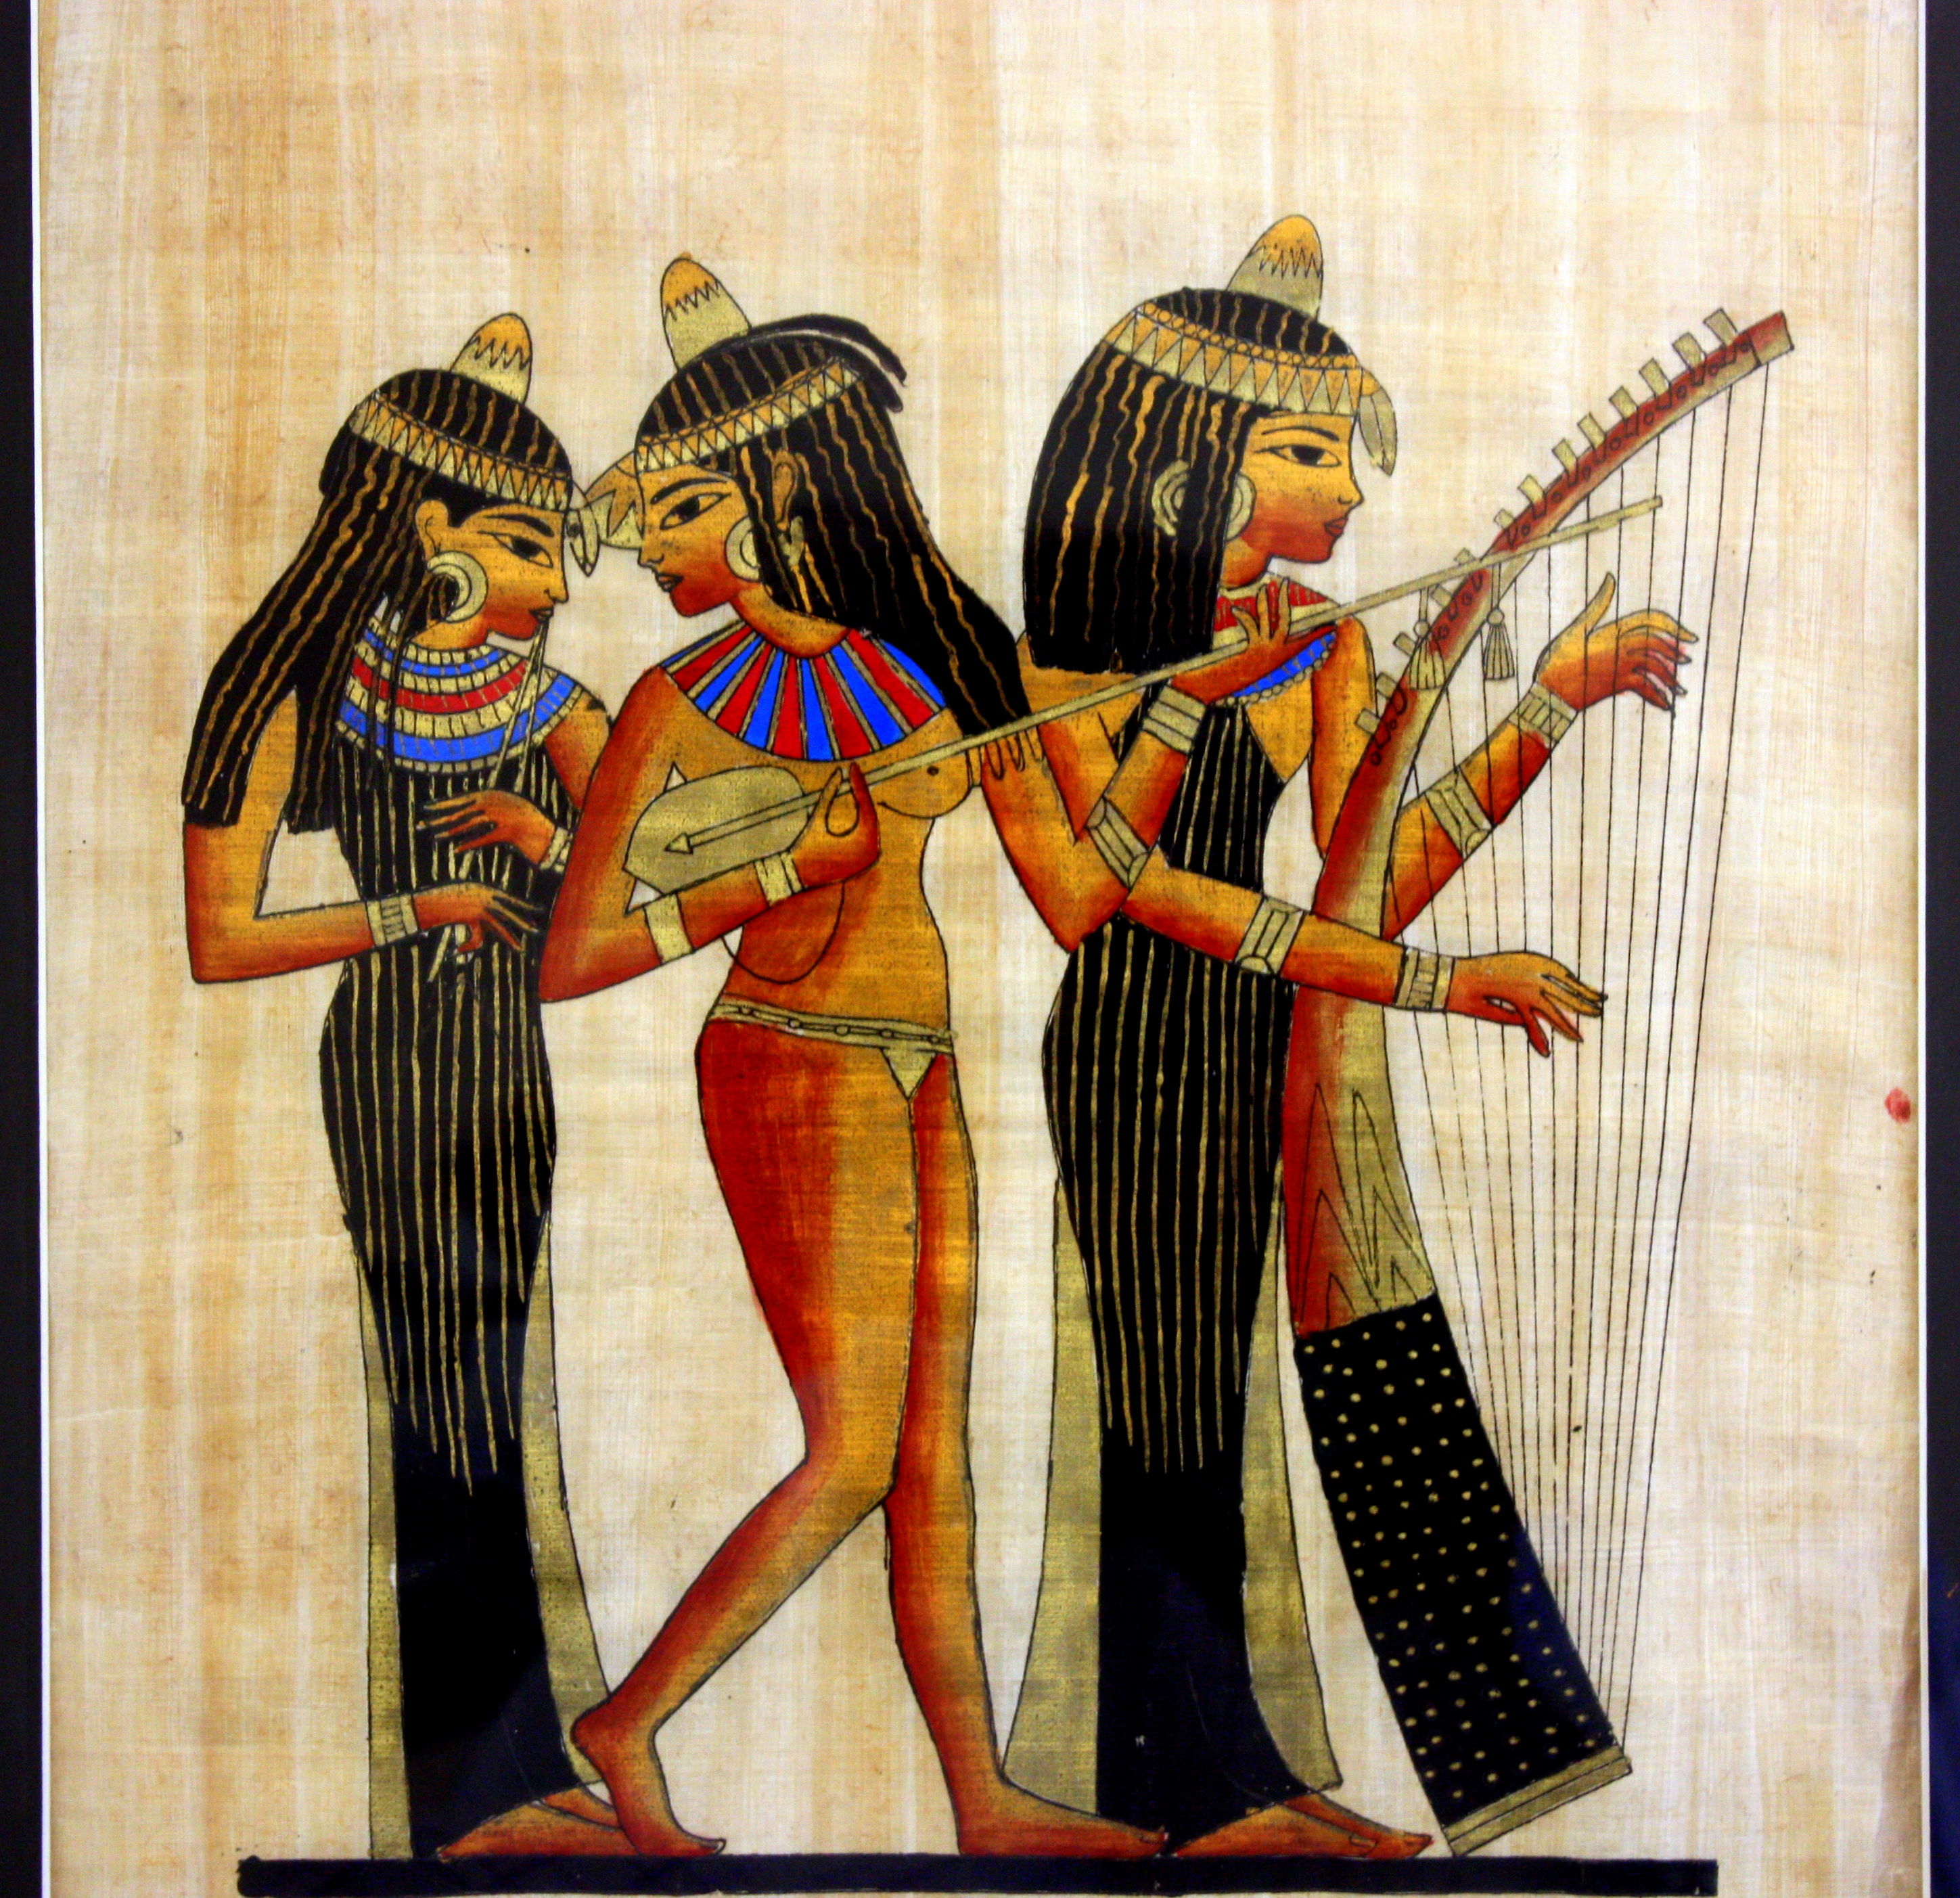 Ancient Egyptian Women Enjoyed A Life Of Equality And Pleasure Rarely Seen In History image picture